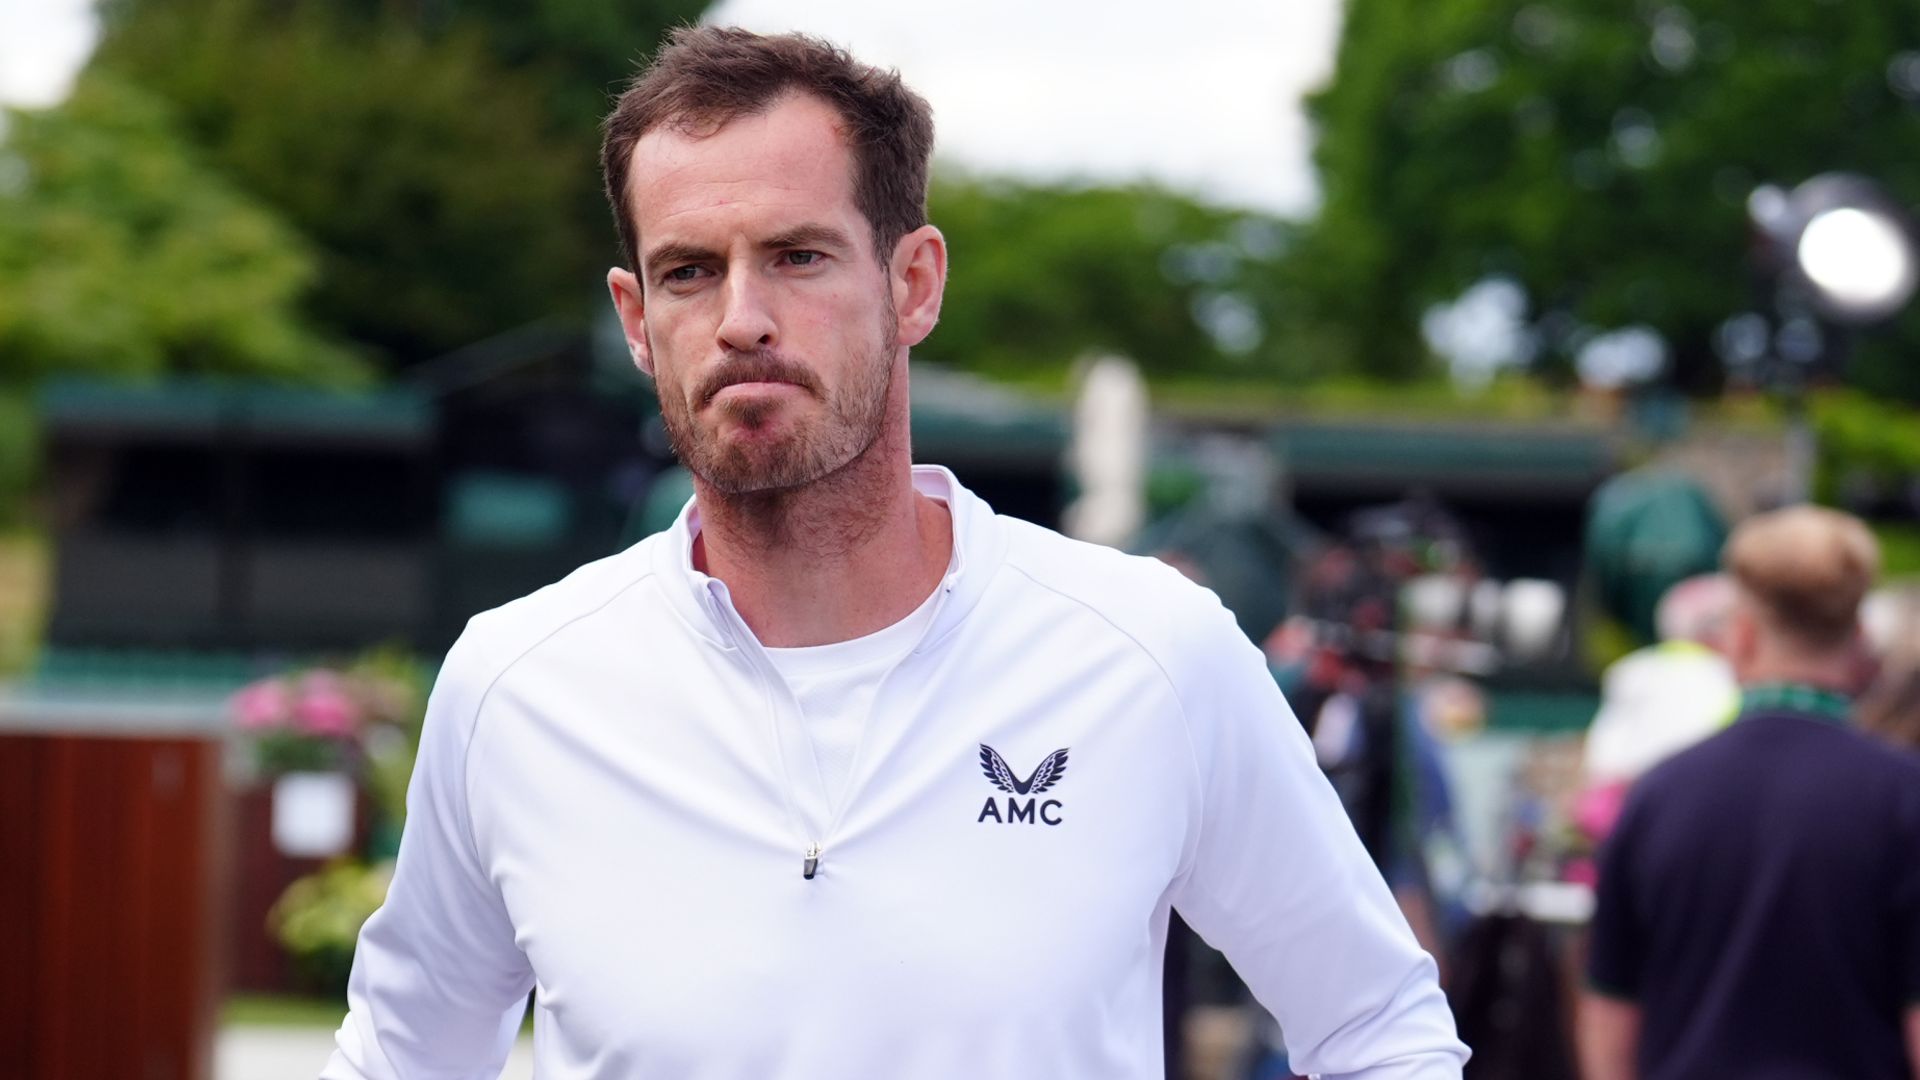 Murray to play doubles at Wimbledon: 'Singles withdrawal right decision'